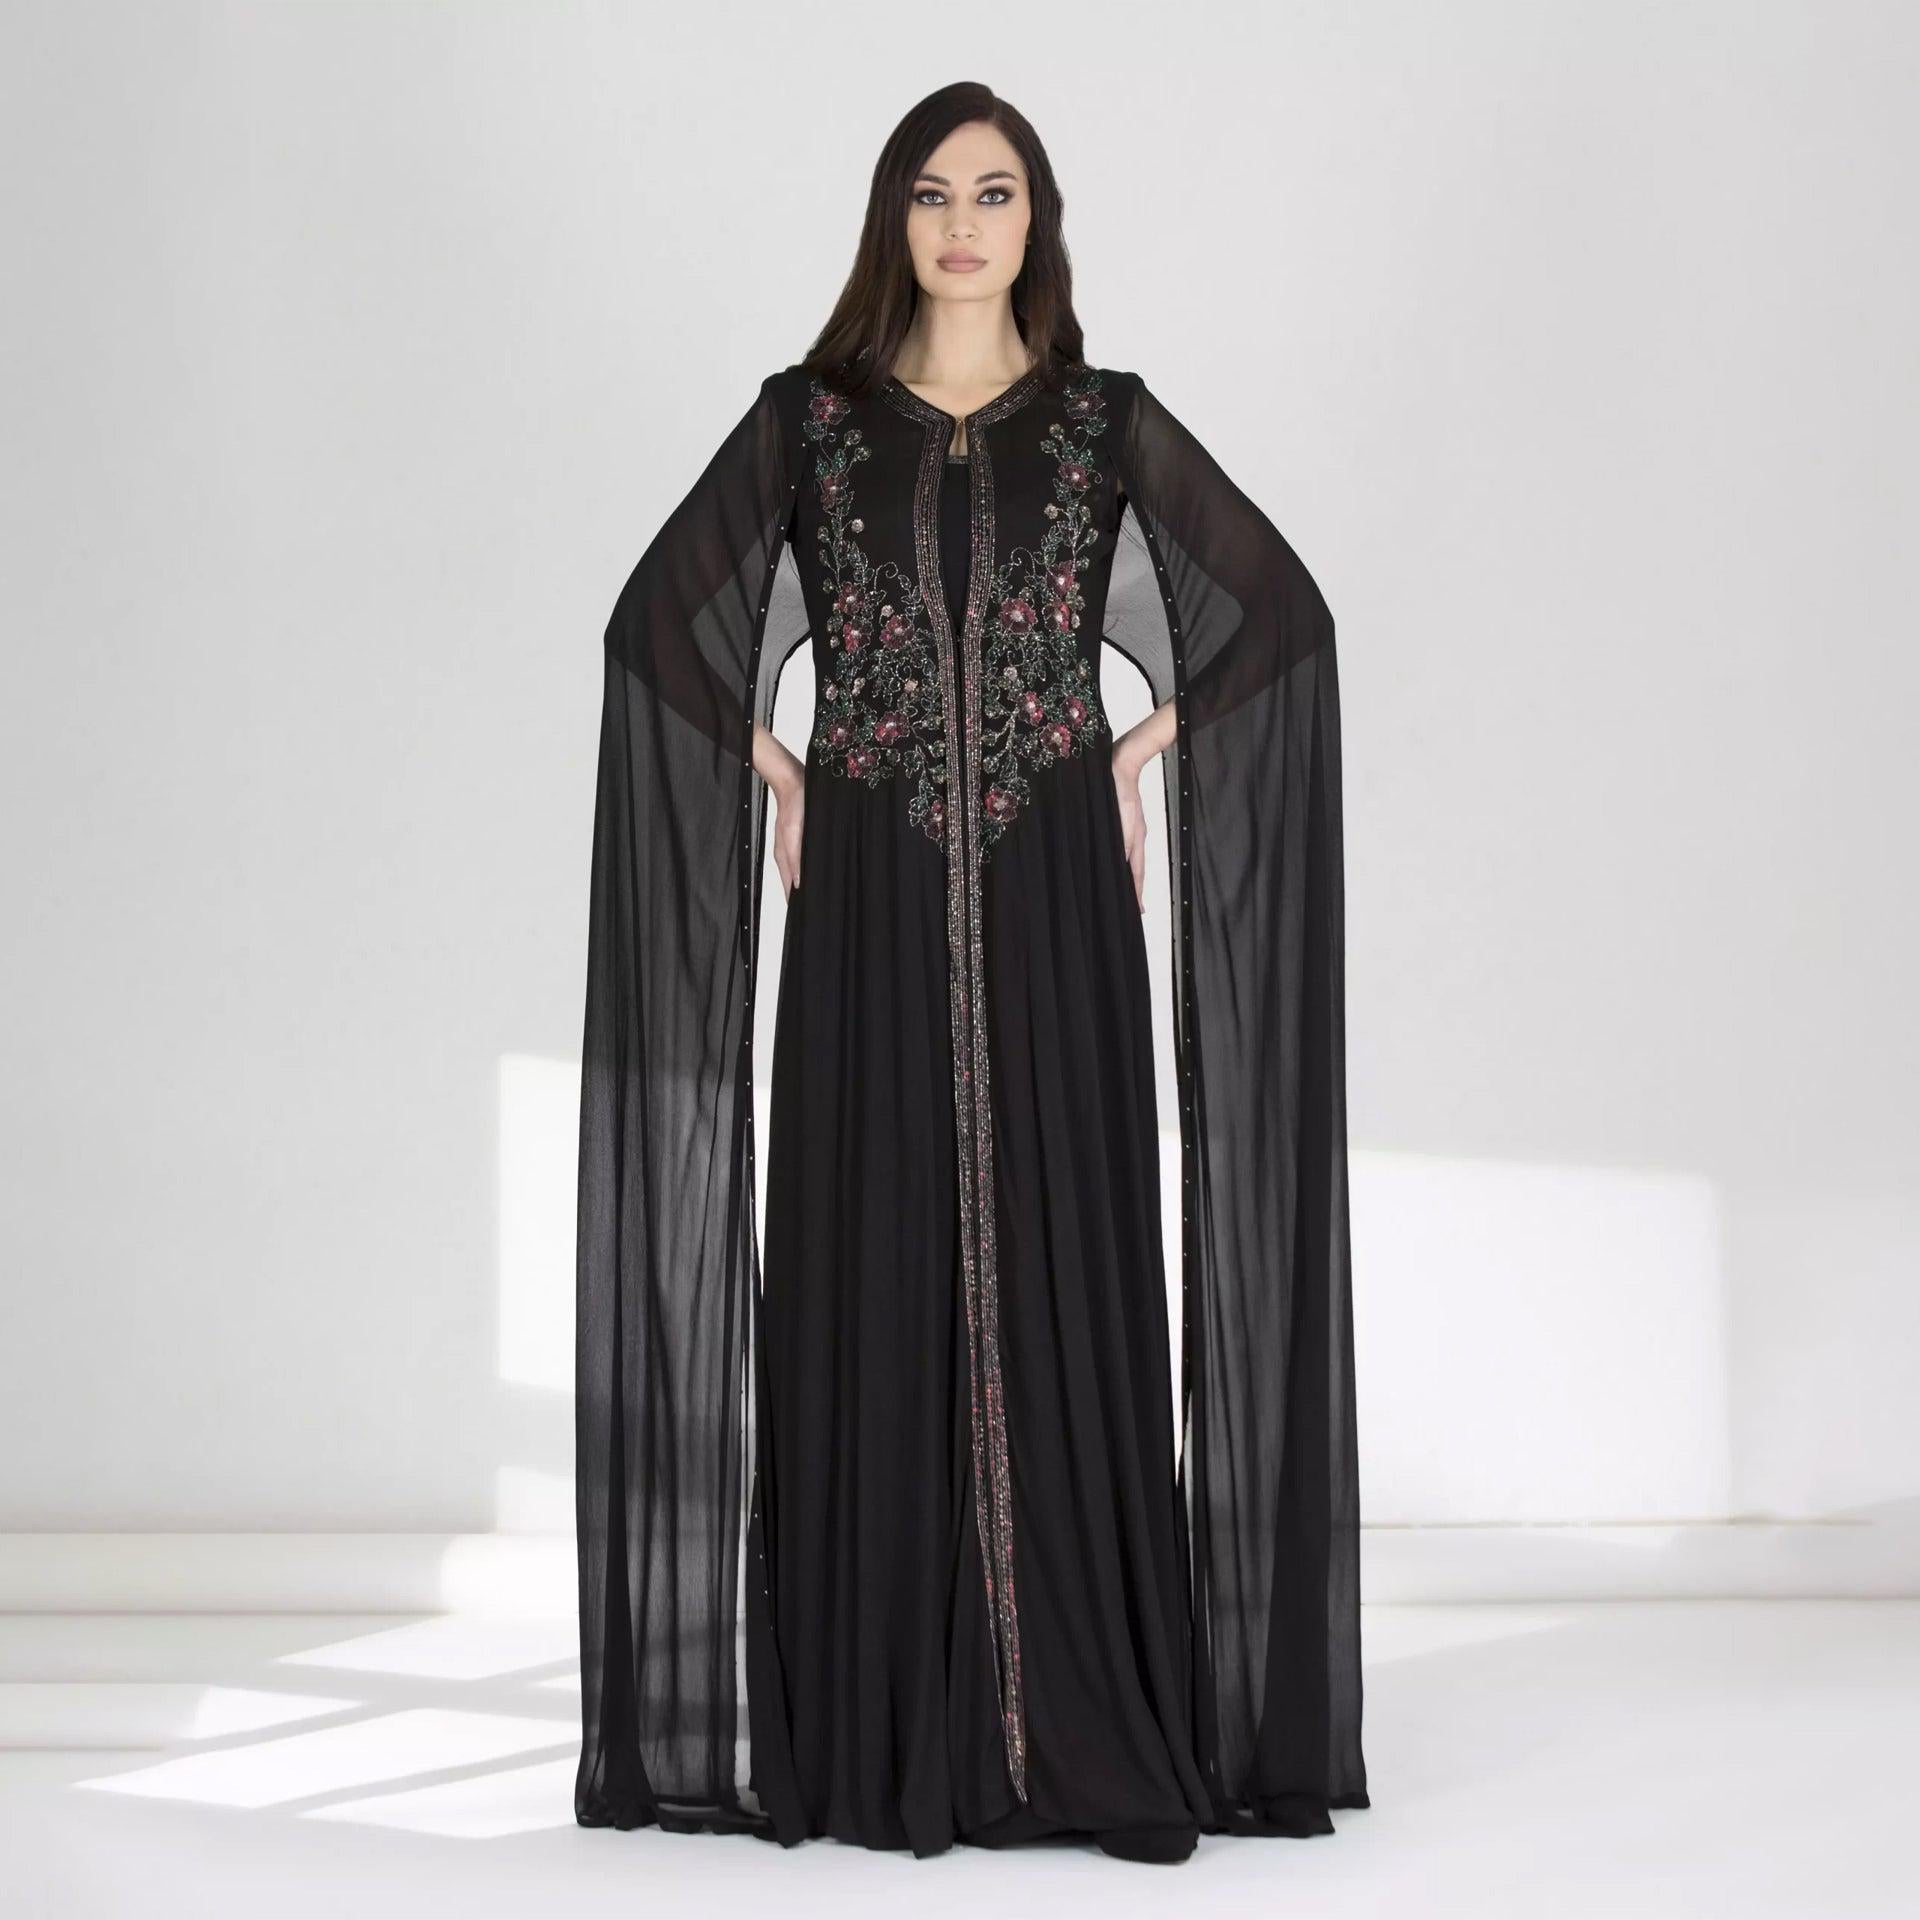 Black Embroidery Sleeveless Dress With Cape From Shalky